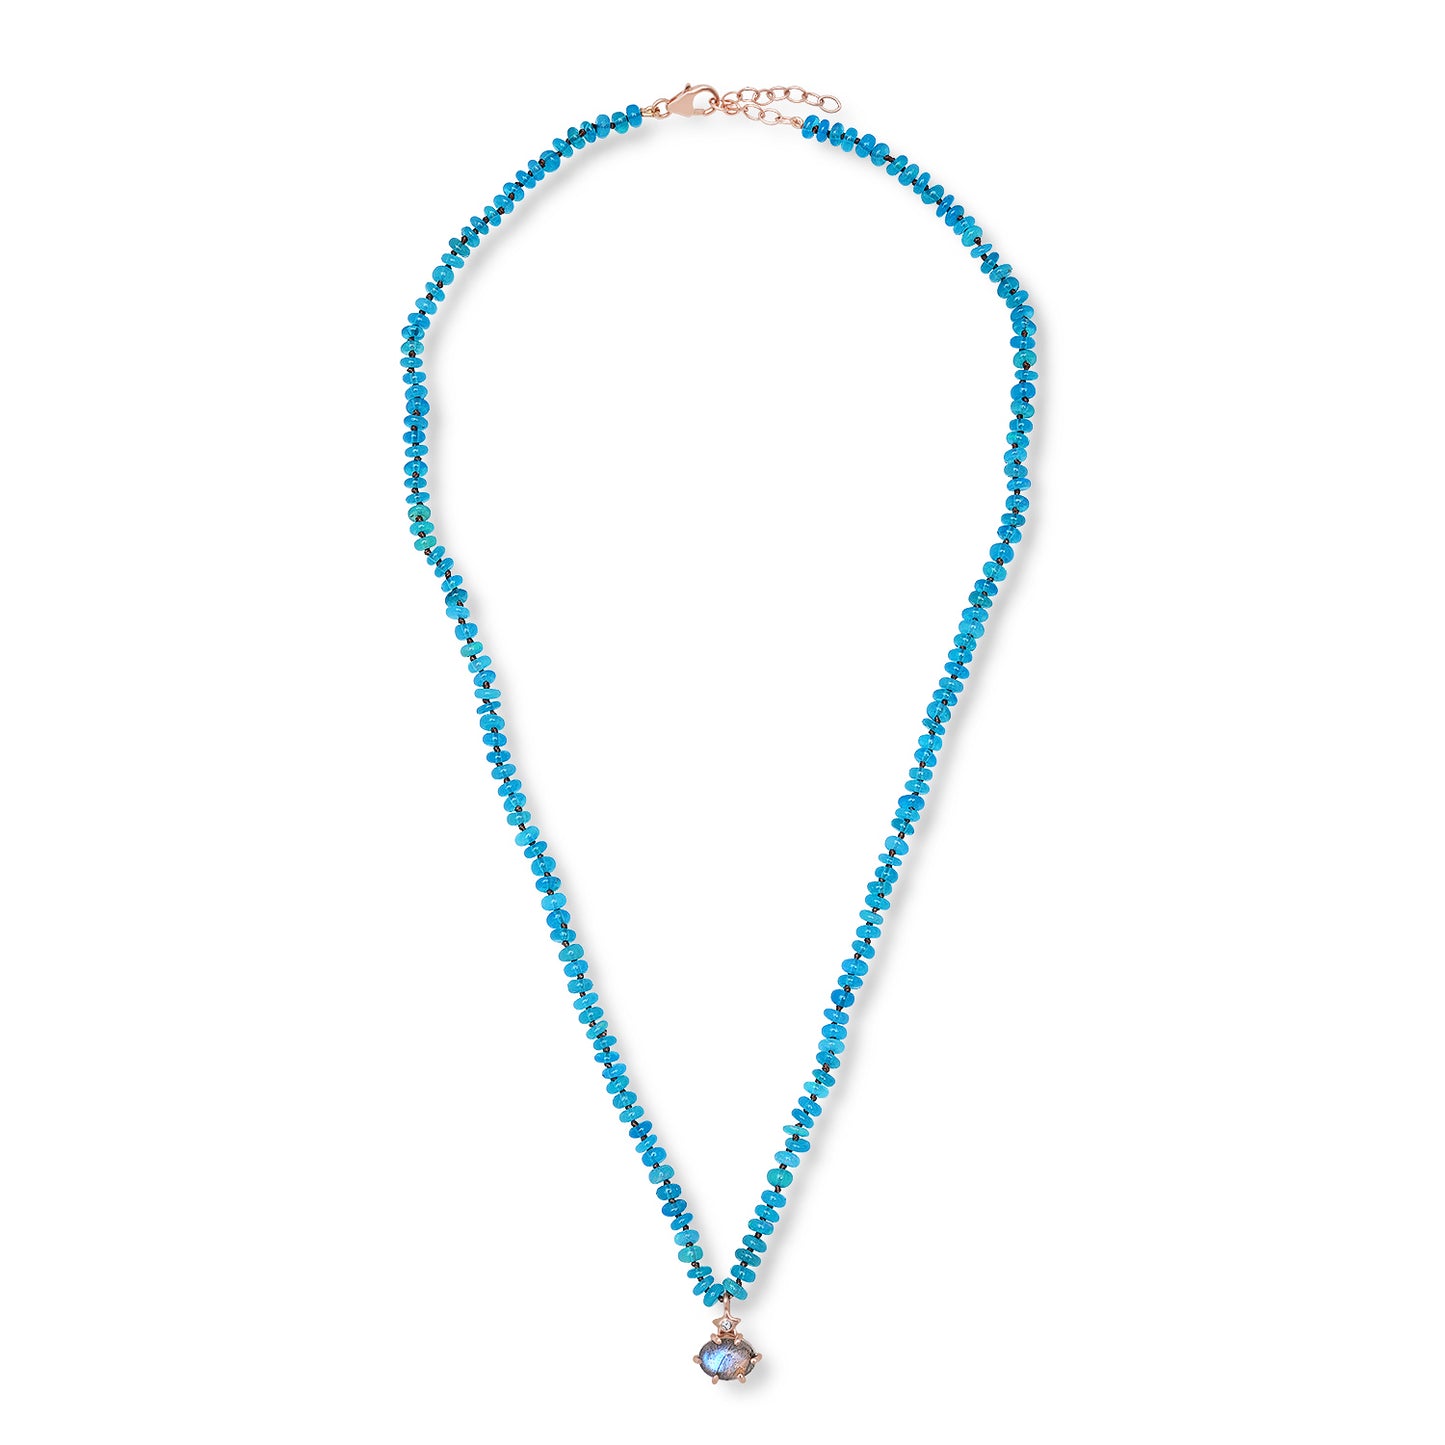 Teal Ethiopian Opal Beaded Knotted Necklace